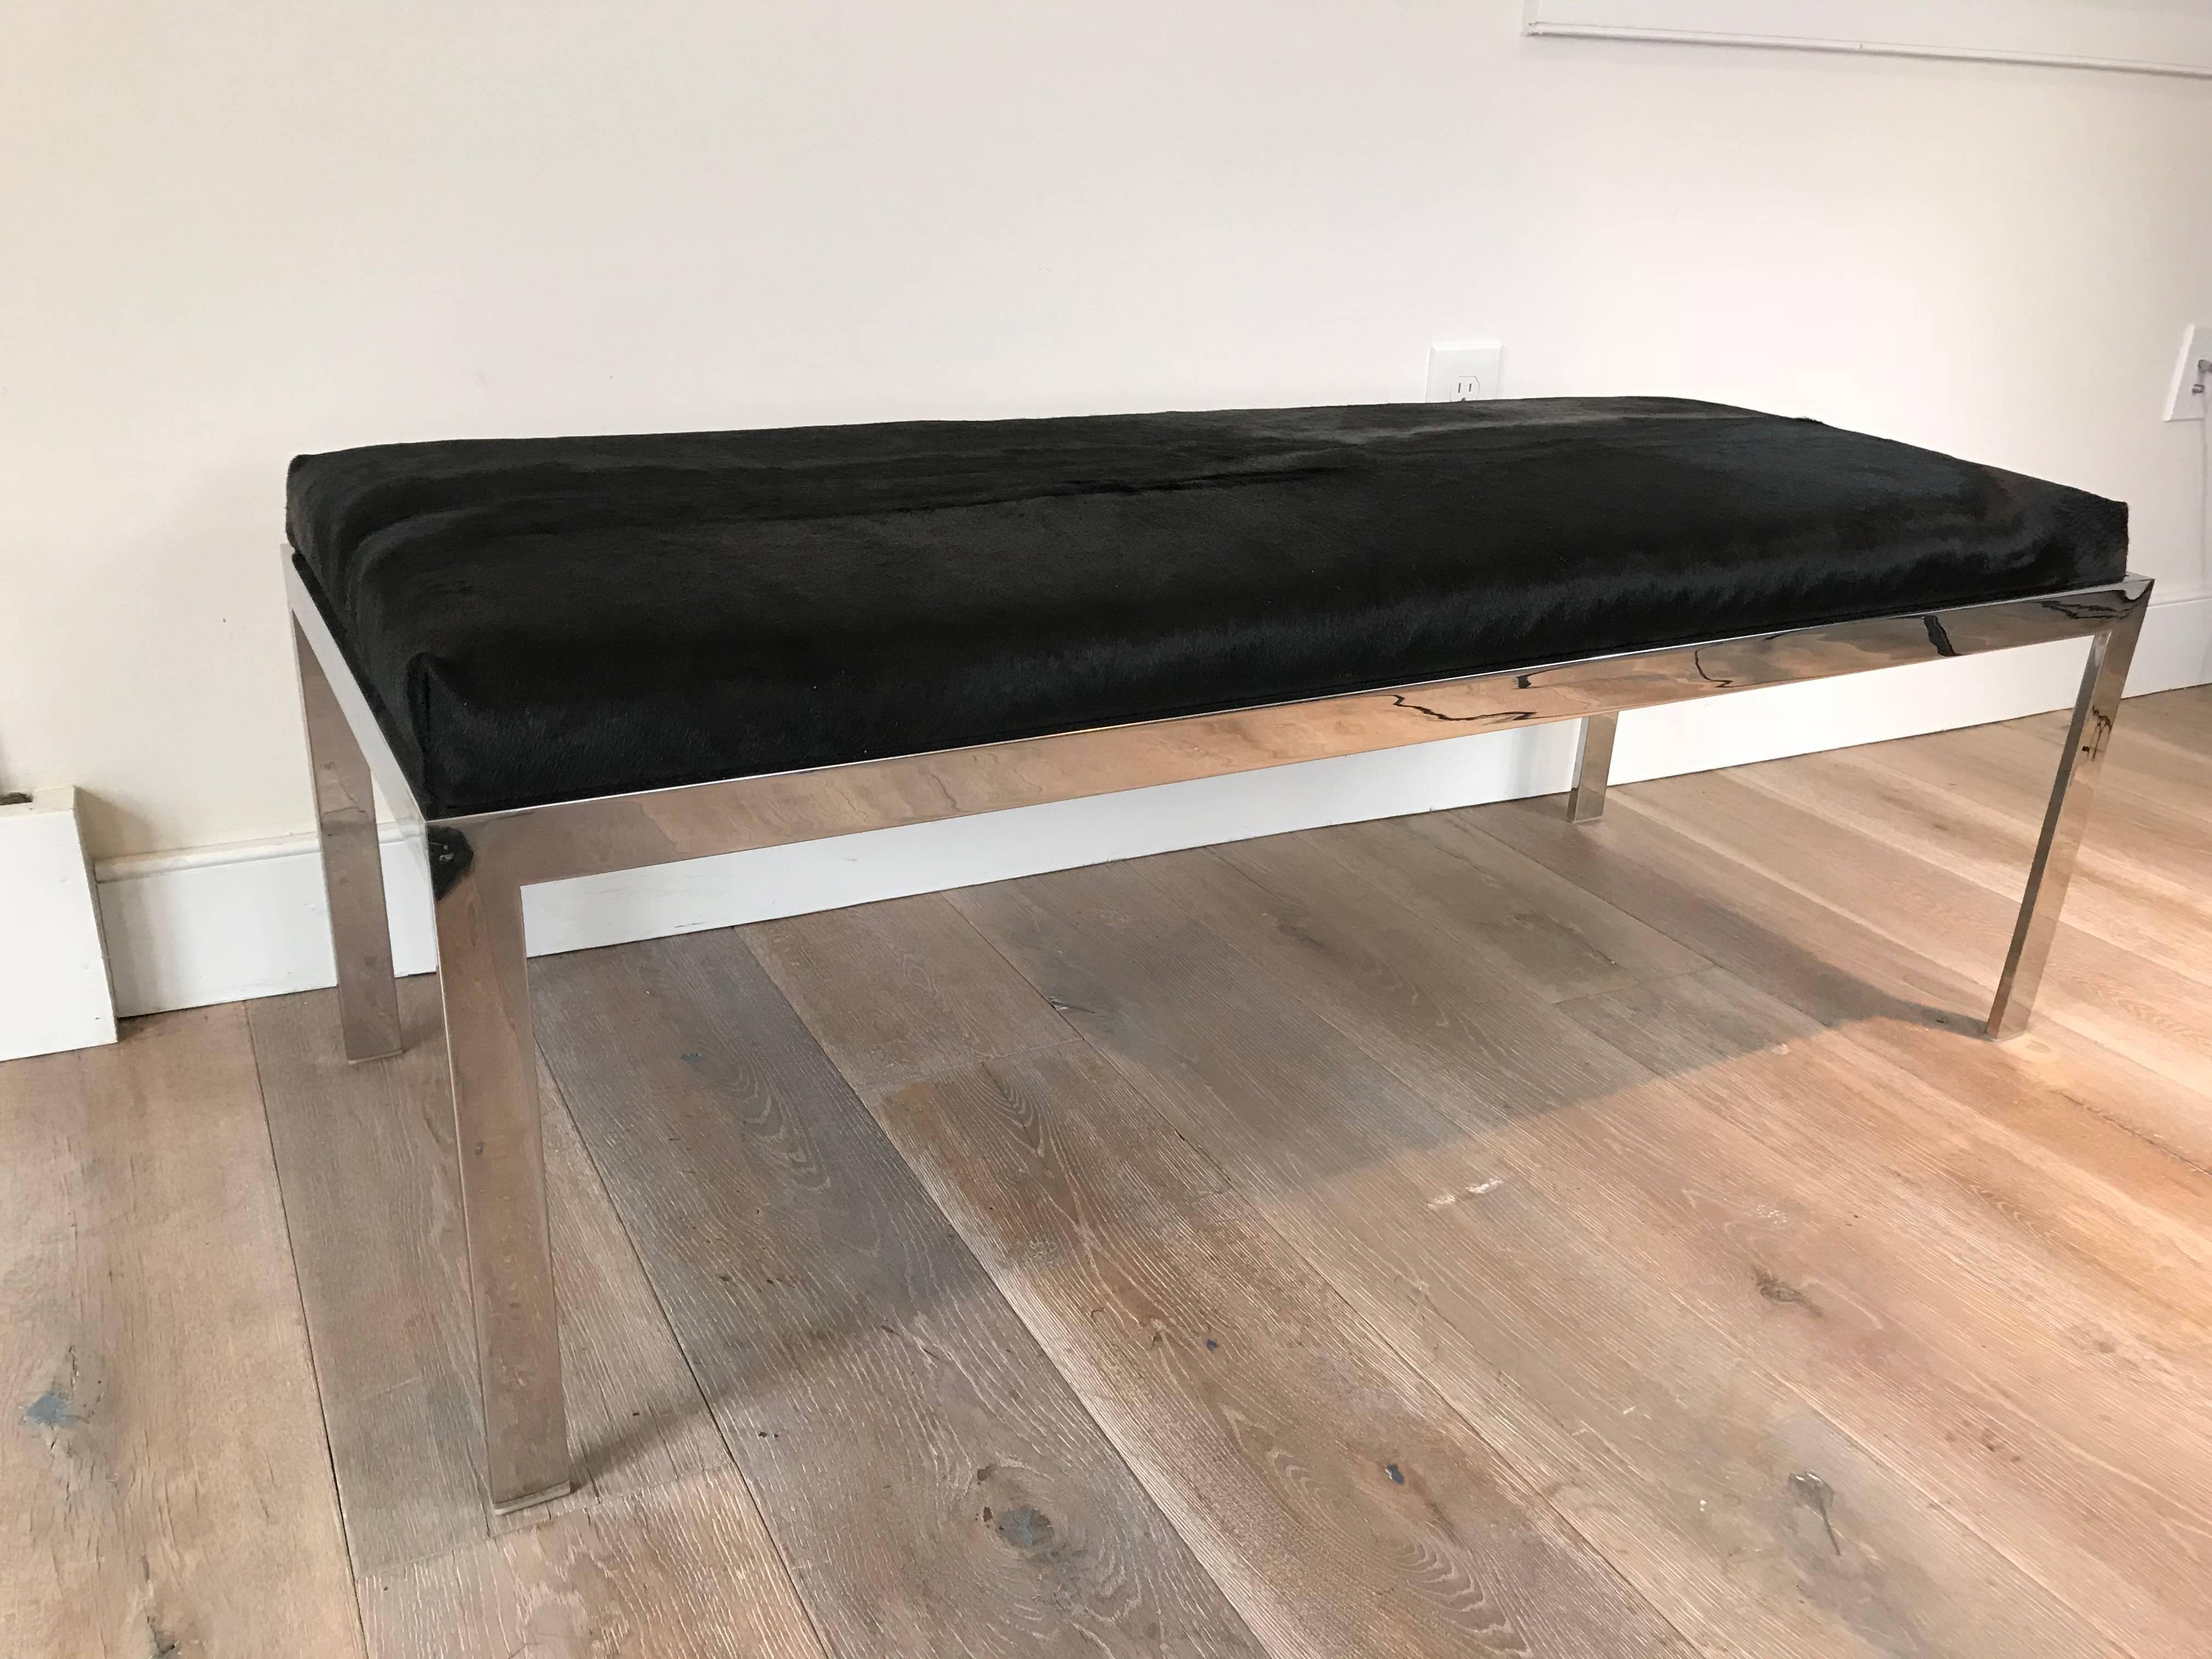 A Milo Baughman chrome bench with jet black cowhide upholstery.